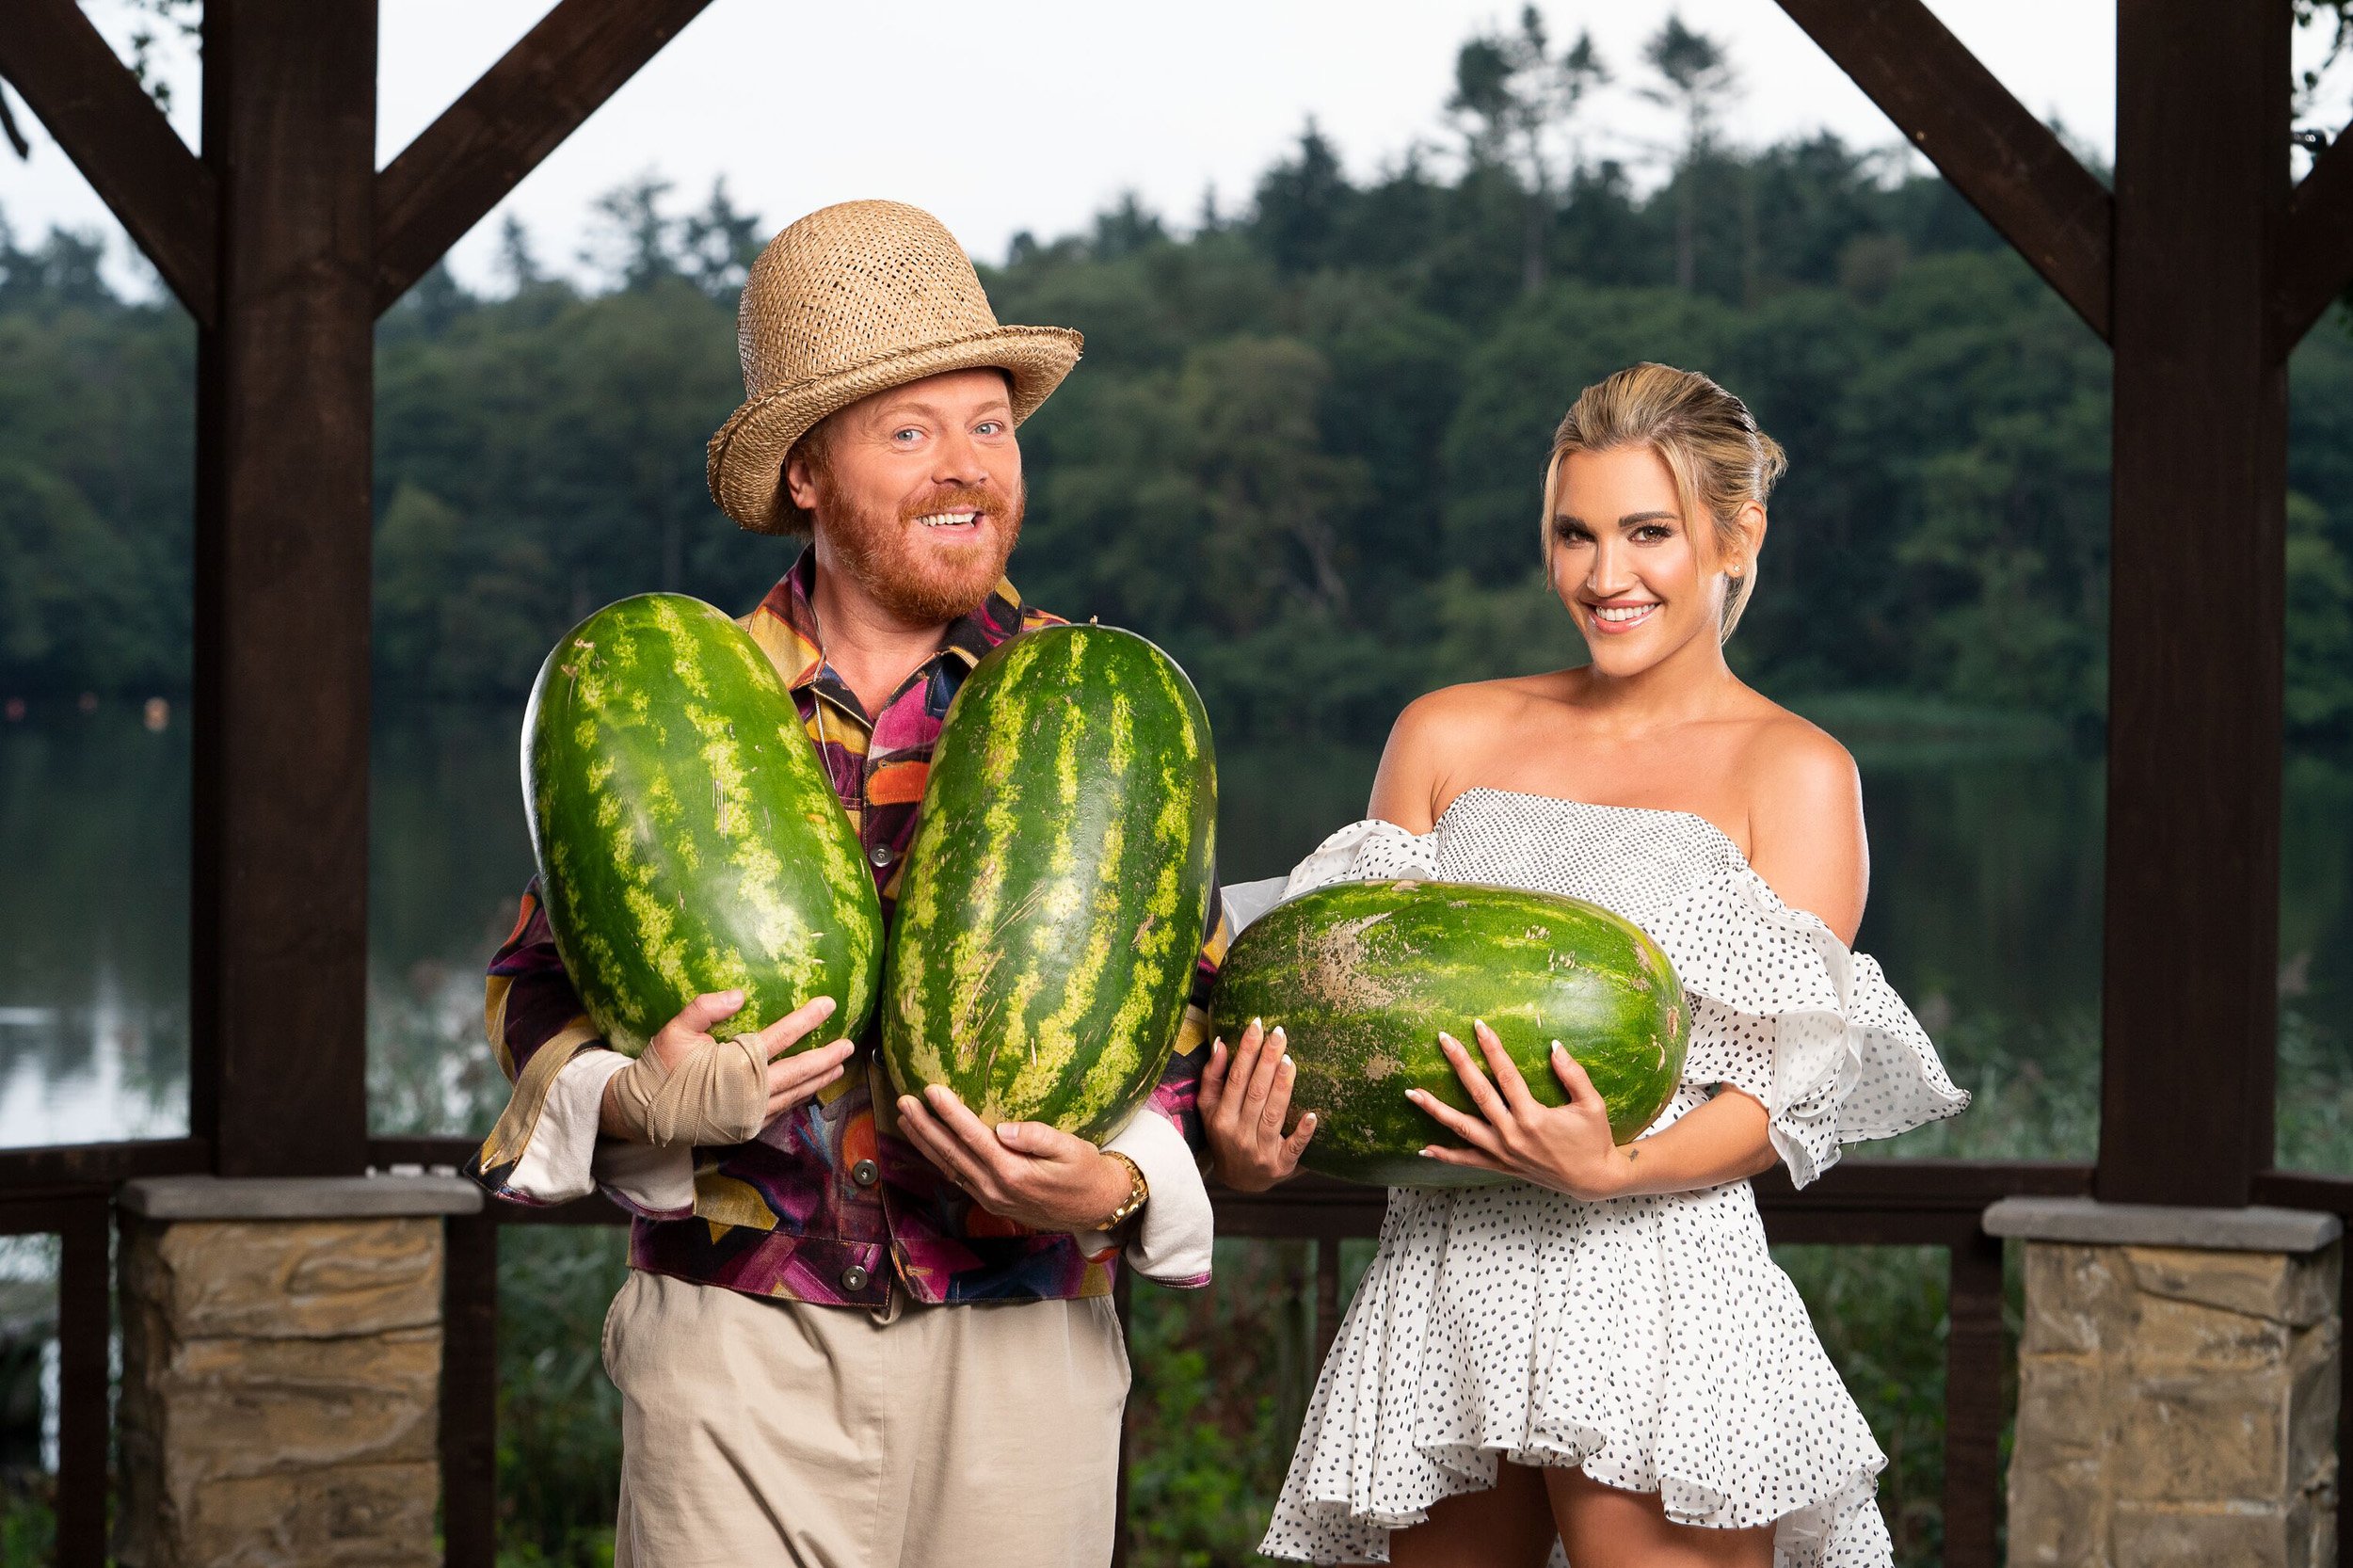  Hosts Keith Lemon and Ashley Roberts  Fremantle / Channel 4 